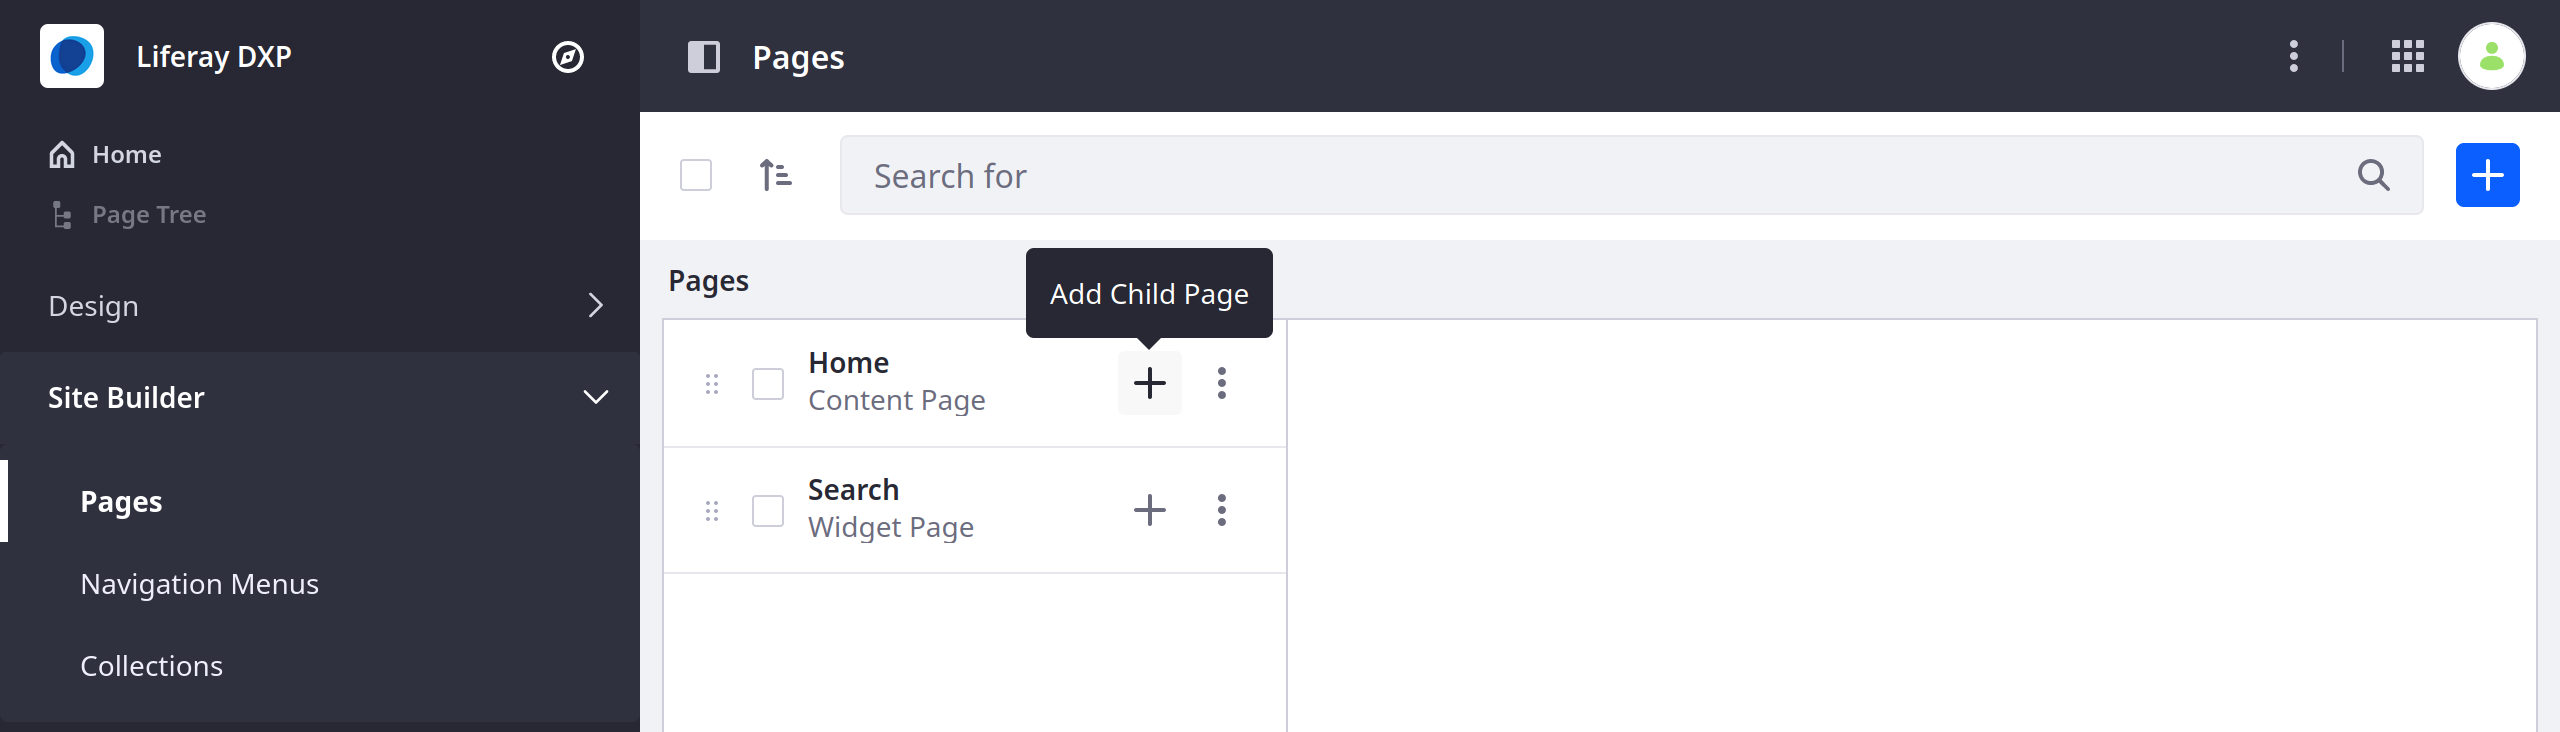 Click the Add buton next to an exiting Page to create a new child Page.